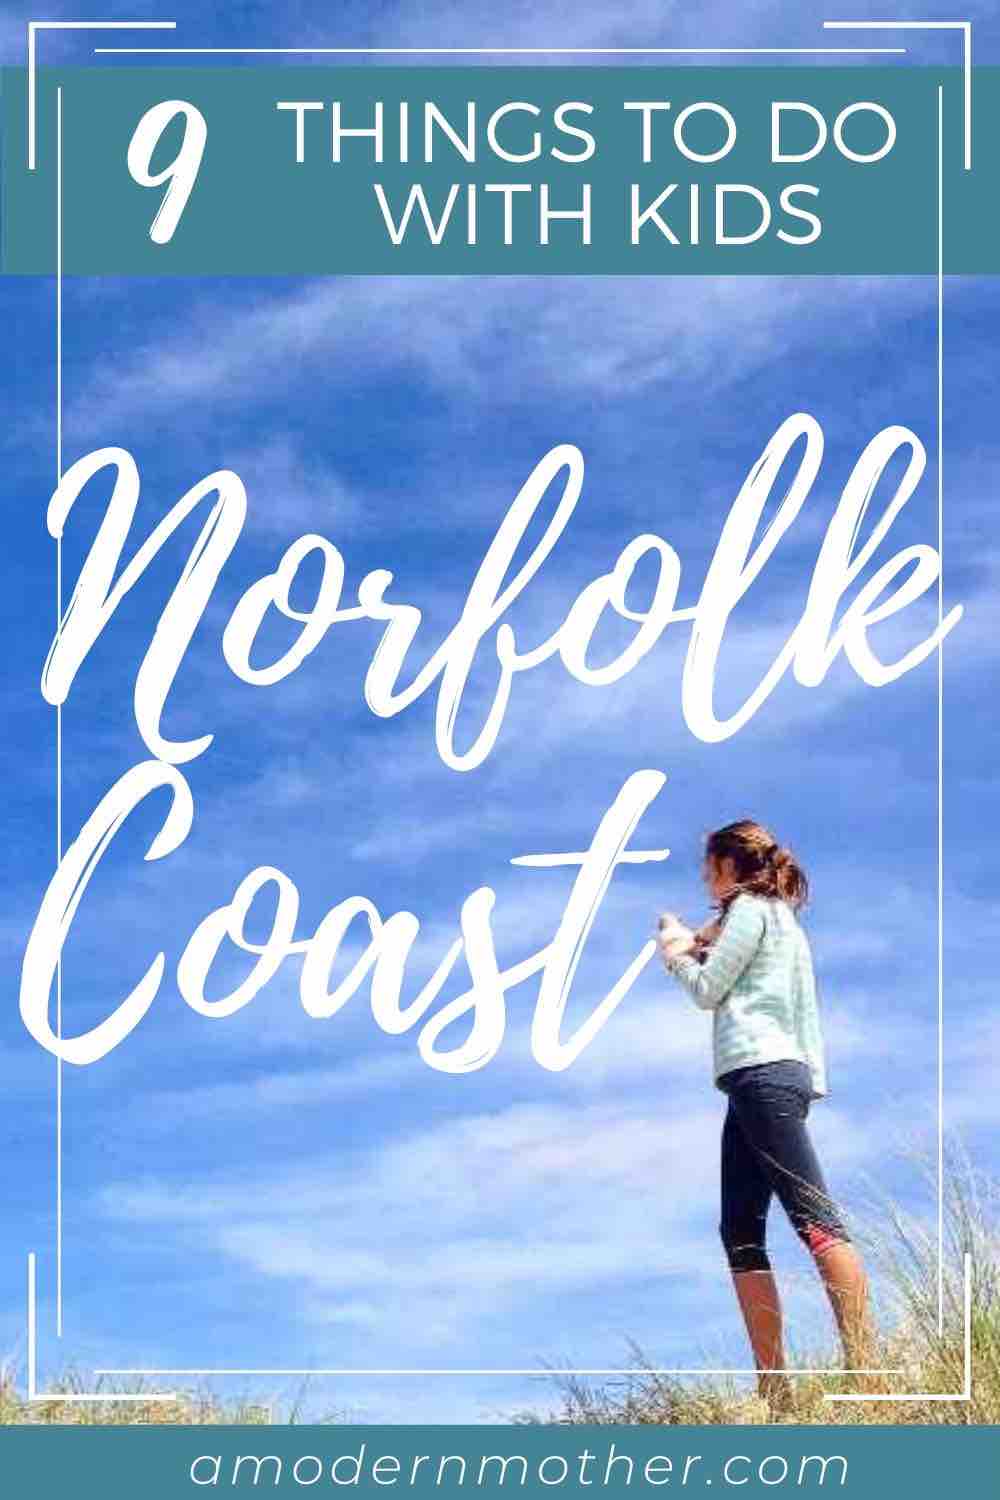 Norfolk Coast: 9 fun things to do with kids and teens!